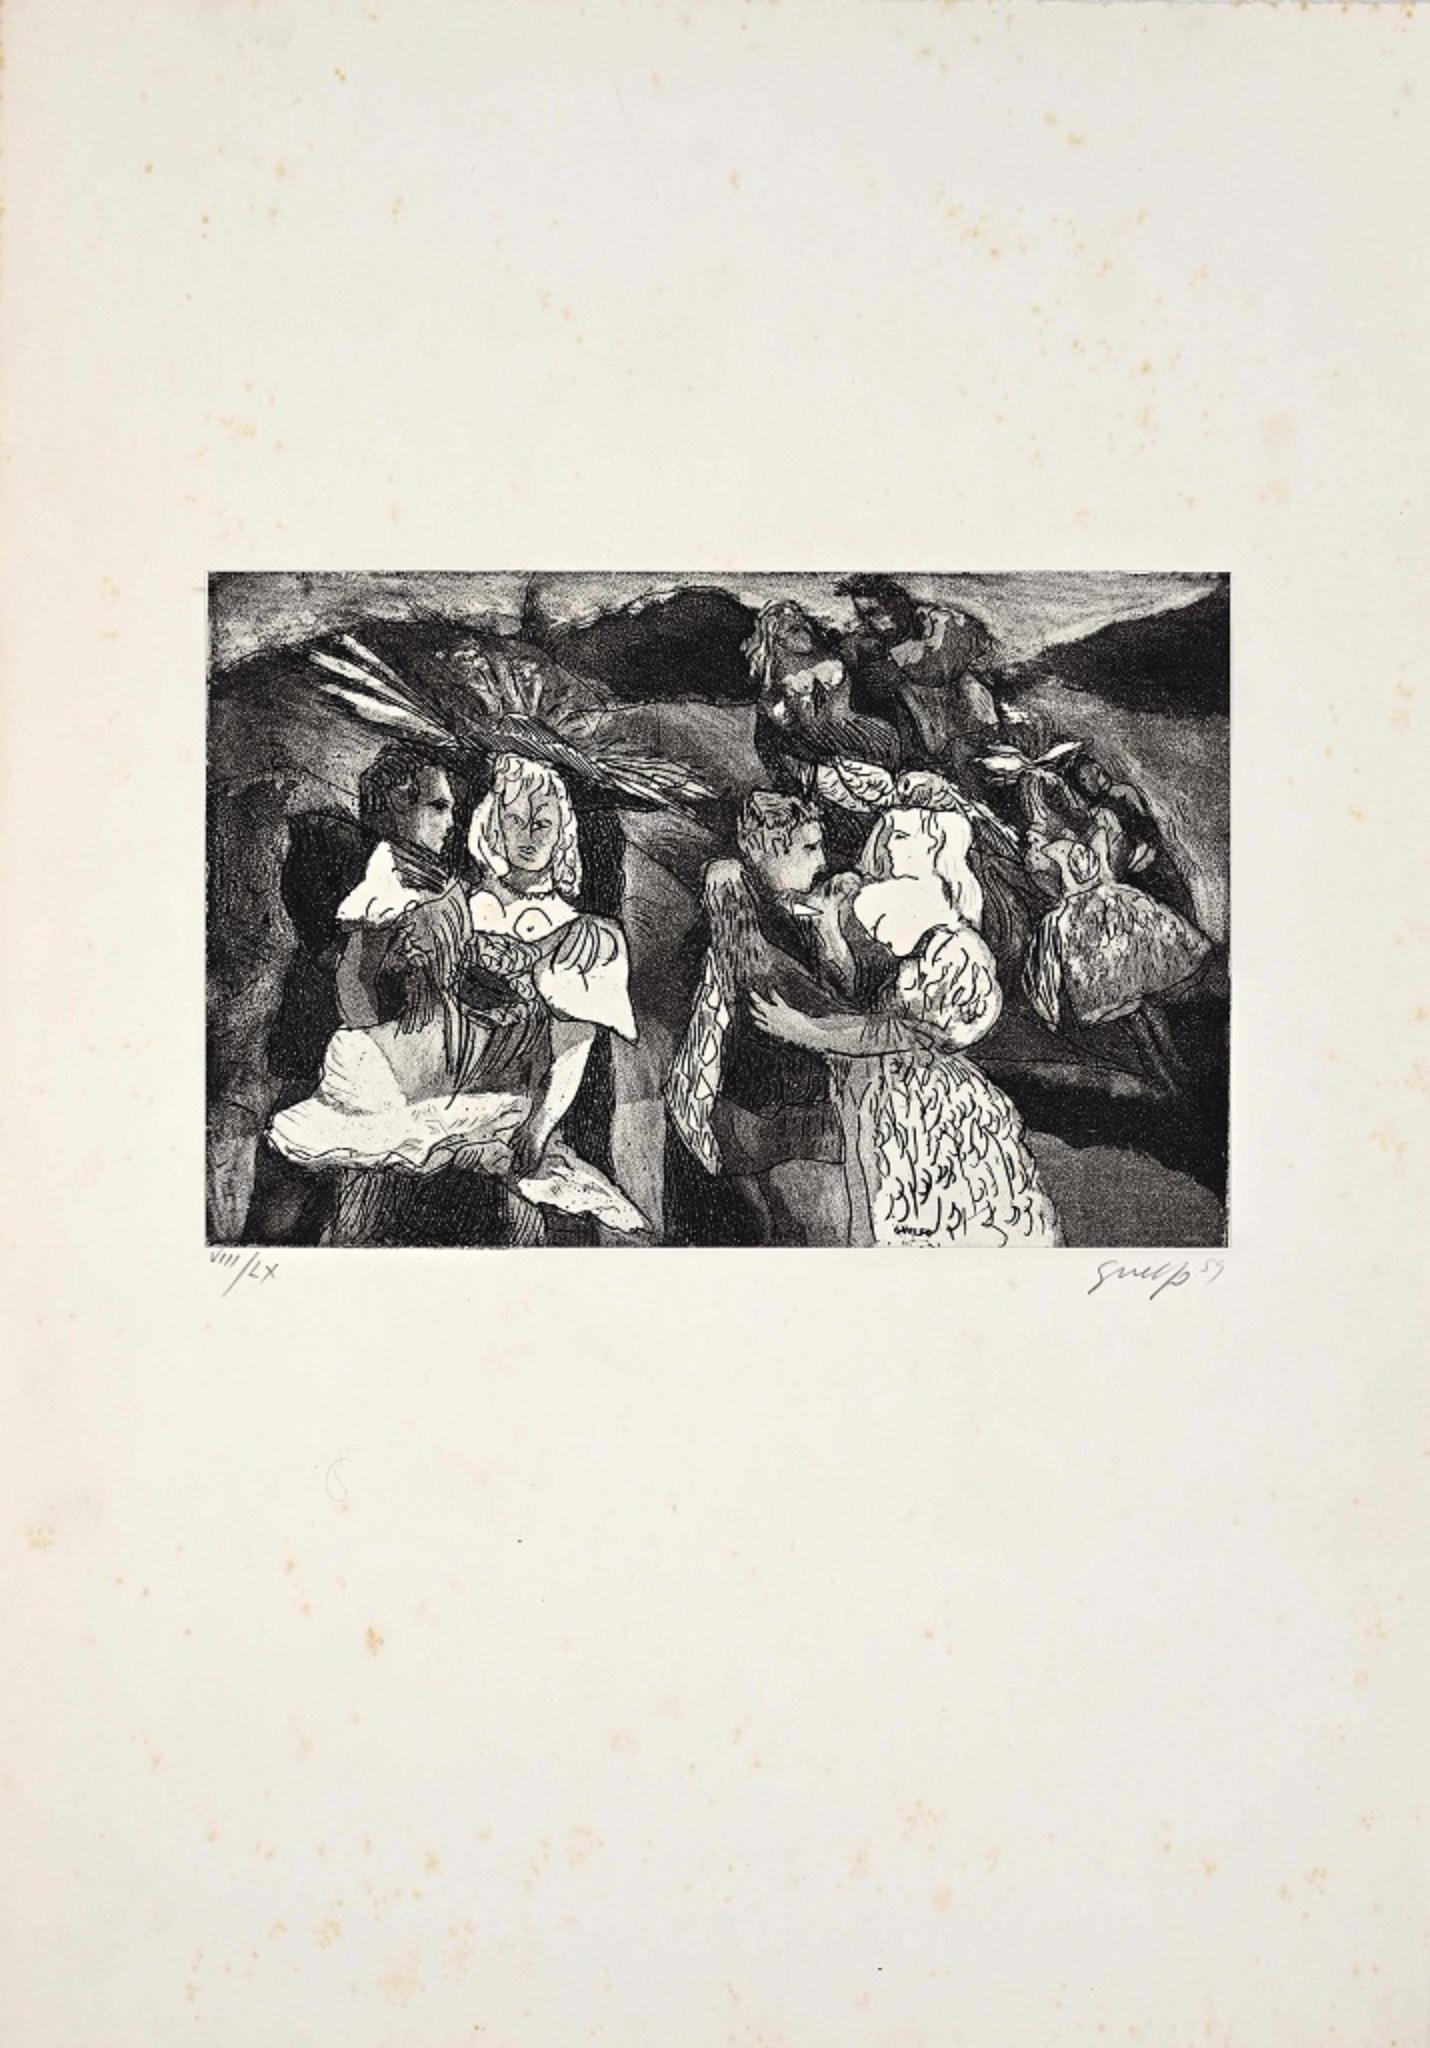 Figures 2 is an original etching realized by Guelfo Bianchini in 1959.

The artwork is hand-signed by the artist on the lower right corner, and numbered on the lower left corner.

In good conditions except for some foxing spots on the white